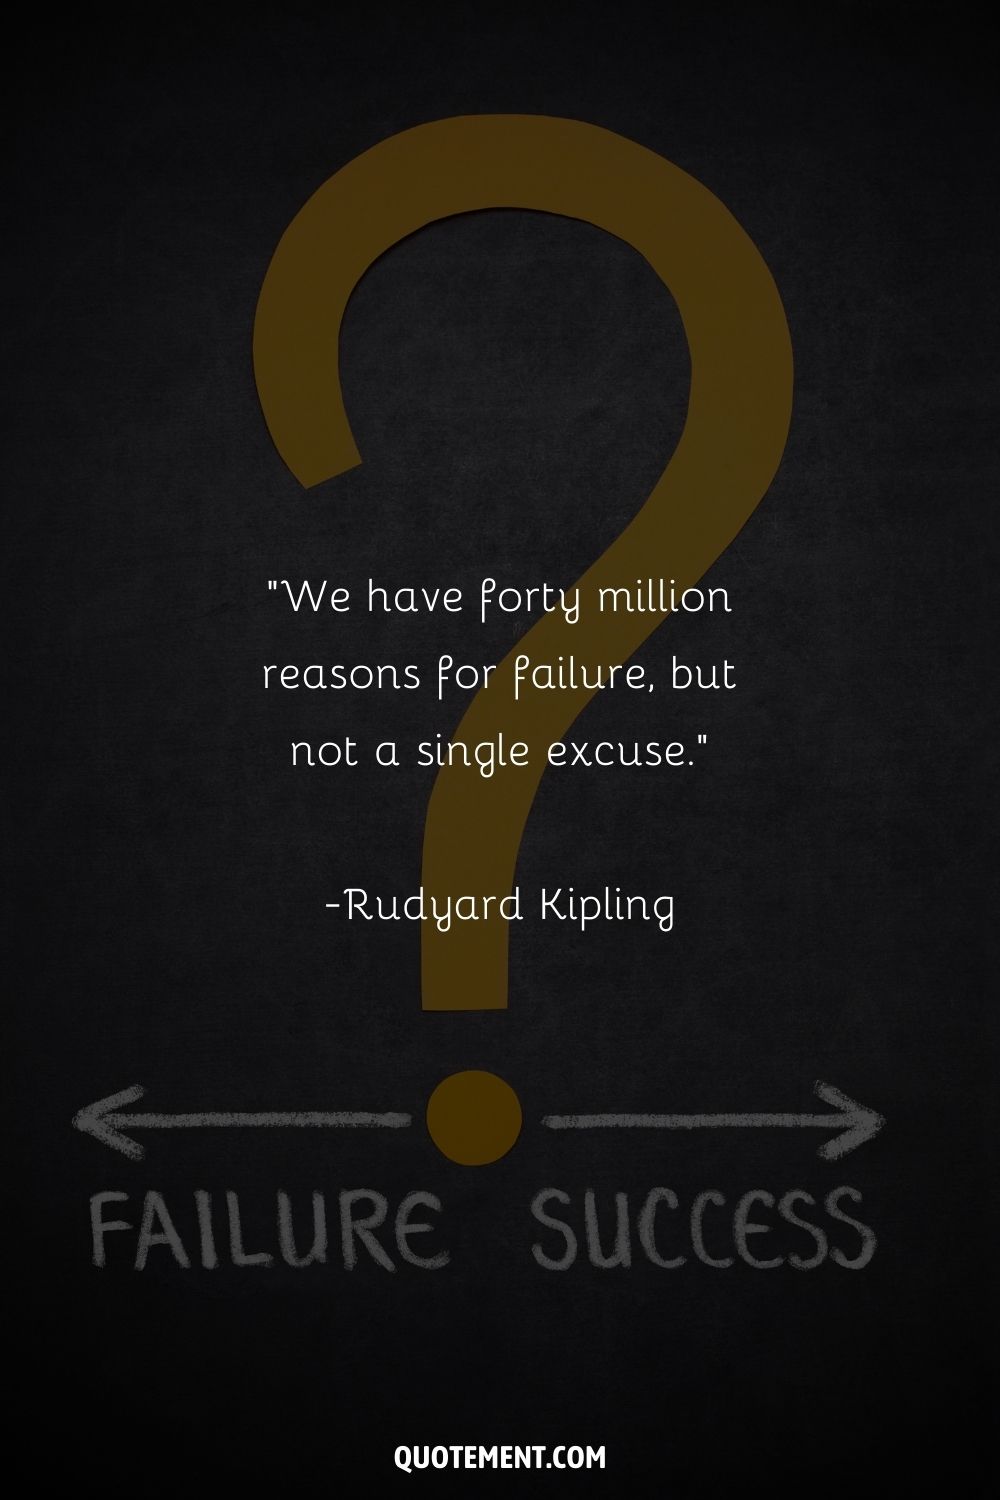 “We have forty million reasons for failure, but not a single excuse.” ― Rudyard Kipling